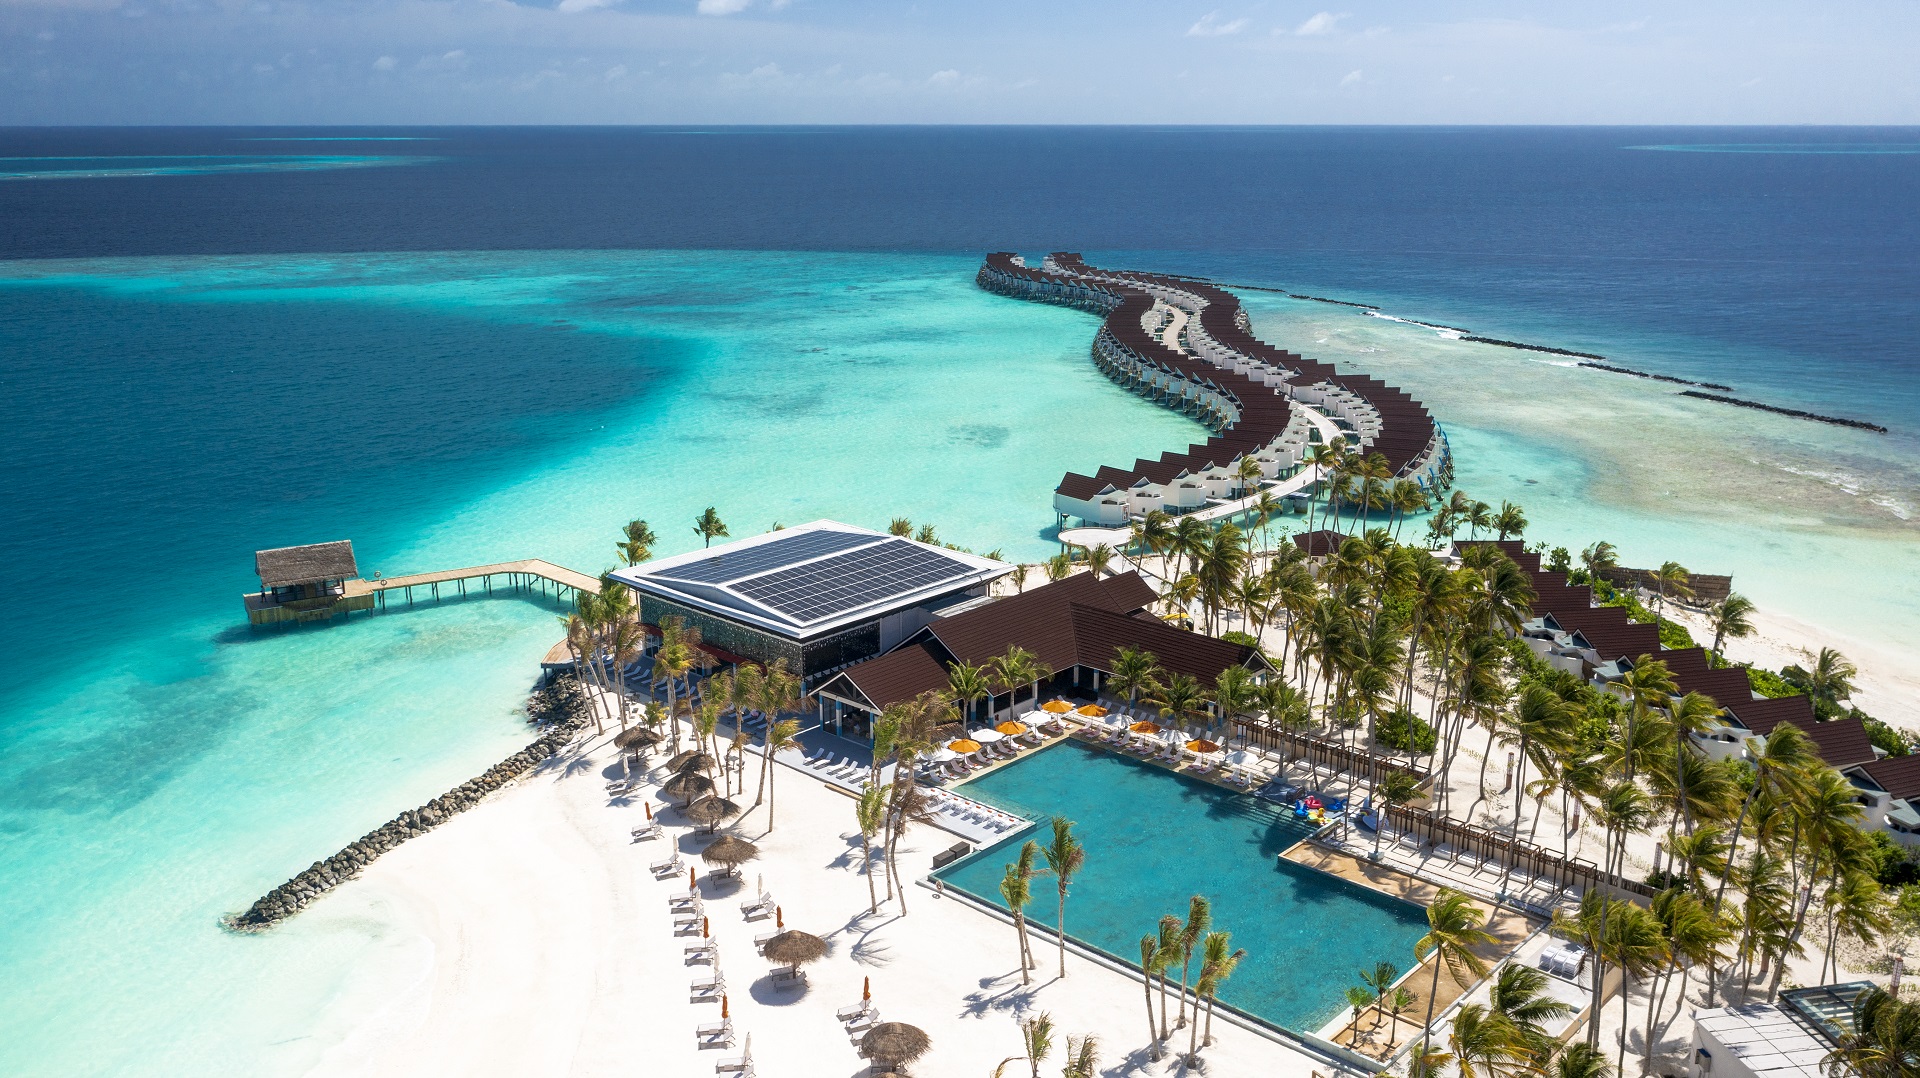 Save 10% on this April departure to the OBLU XPERIENCE Ailafushi